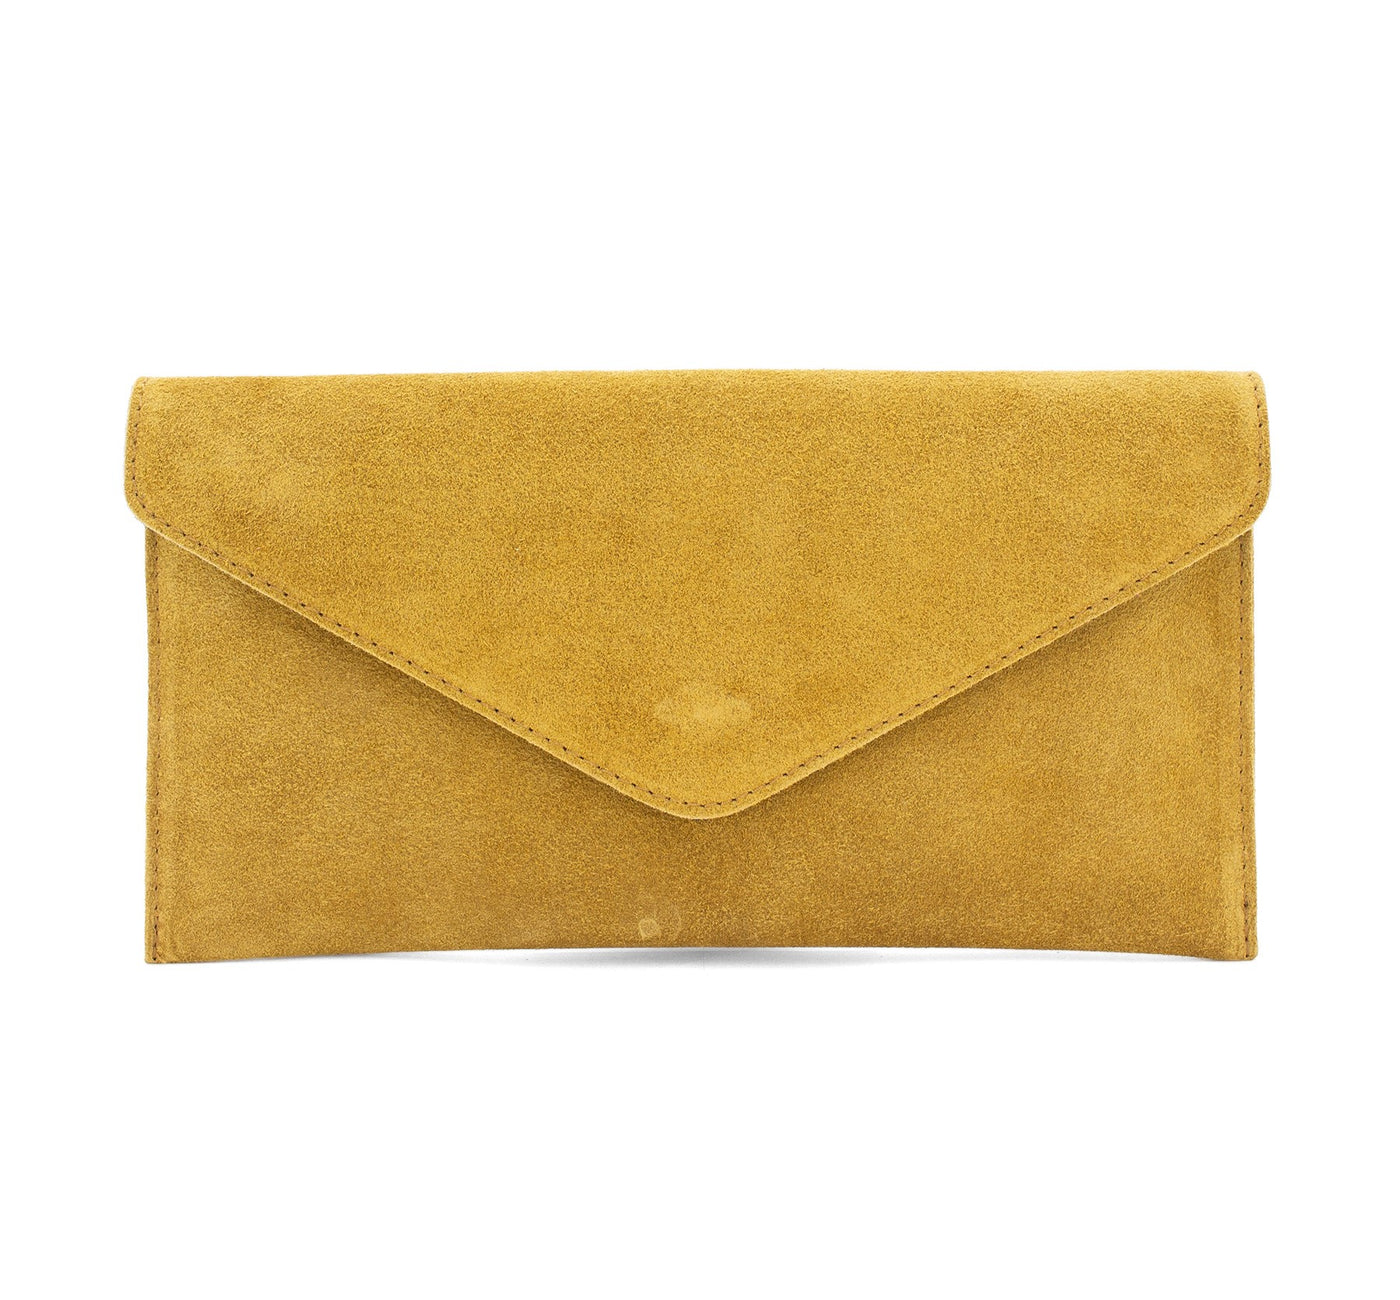 Yellow Suede Leather Clutch Bag